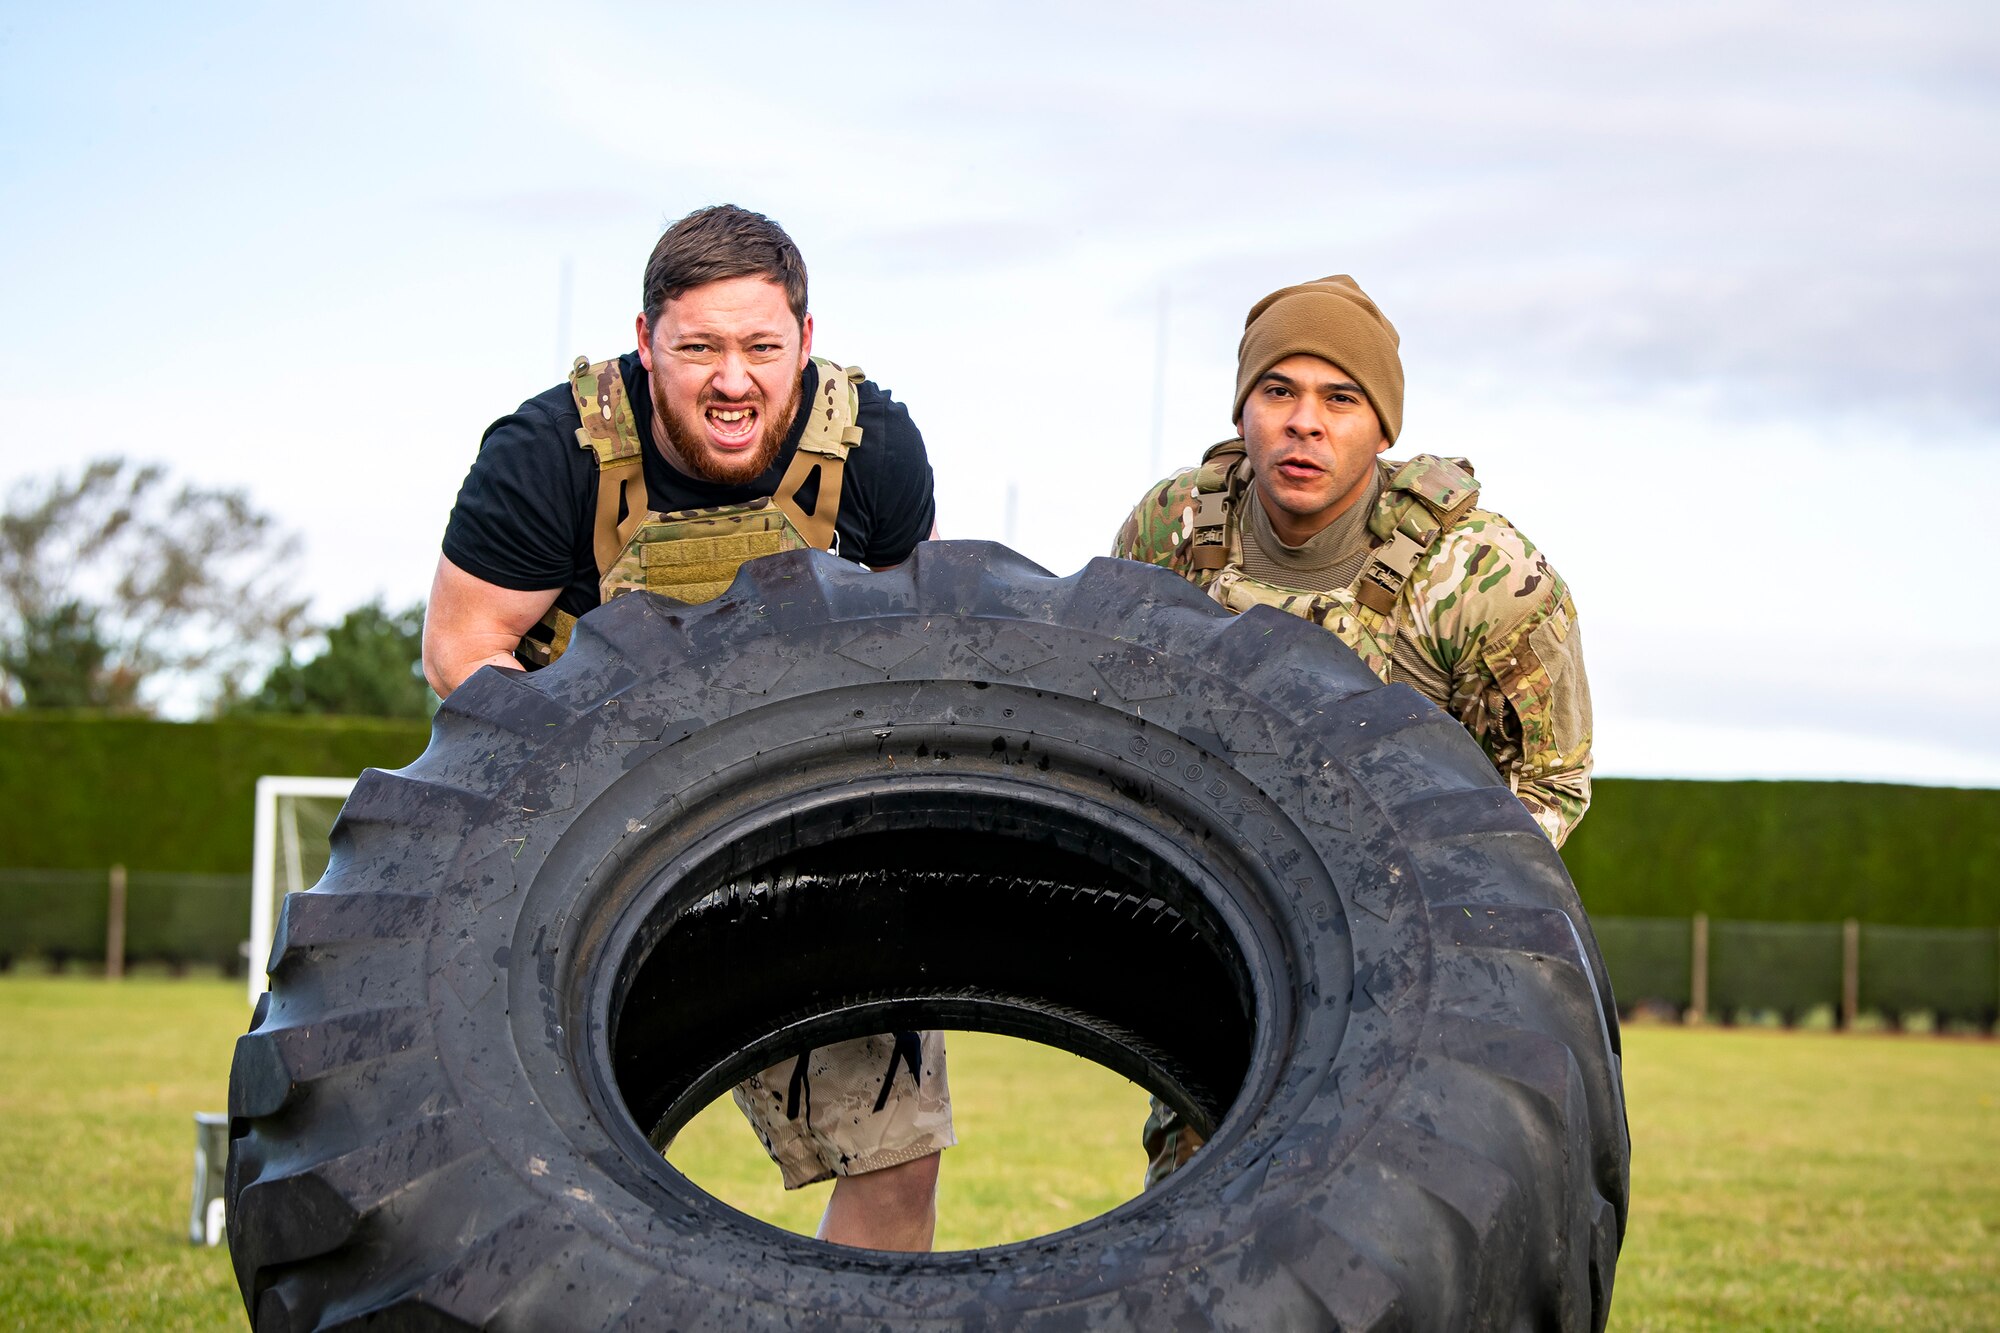 U.S. Air Force Master Sgt. Christian Navarro-Salazar, right, 423rd Security Forces Squadron supply and logistics superintendent, and Luke Young, 423rd SFS resource protection program manager, flip a tire as part of a defender challenge at RAF Alconbury, England, Oct. 13, 2021. The challenge was part of National Police Week where defenders paid homage to those who have served as police officers and to honor those that lost their lives in the line of duty. (U.S. Air Force photo by Senior Airman Eugene Oliver)